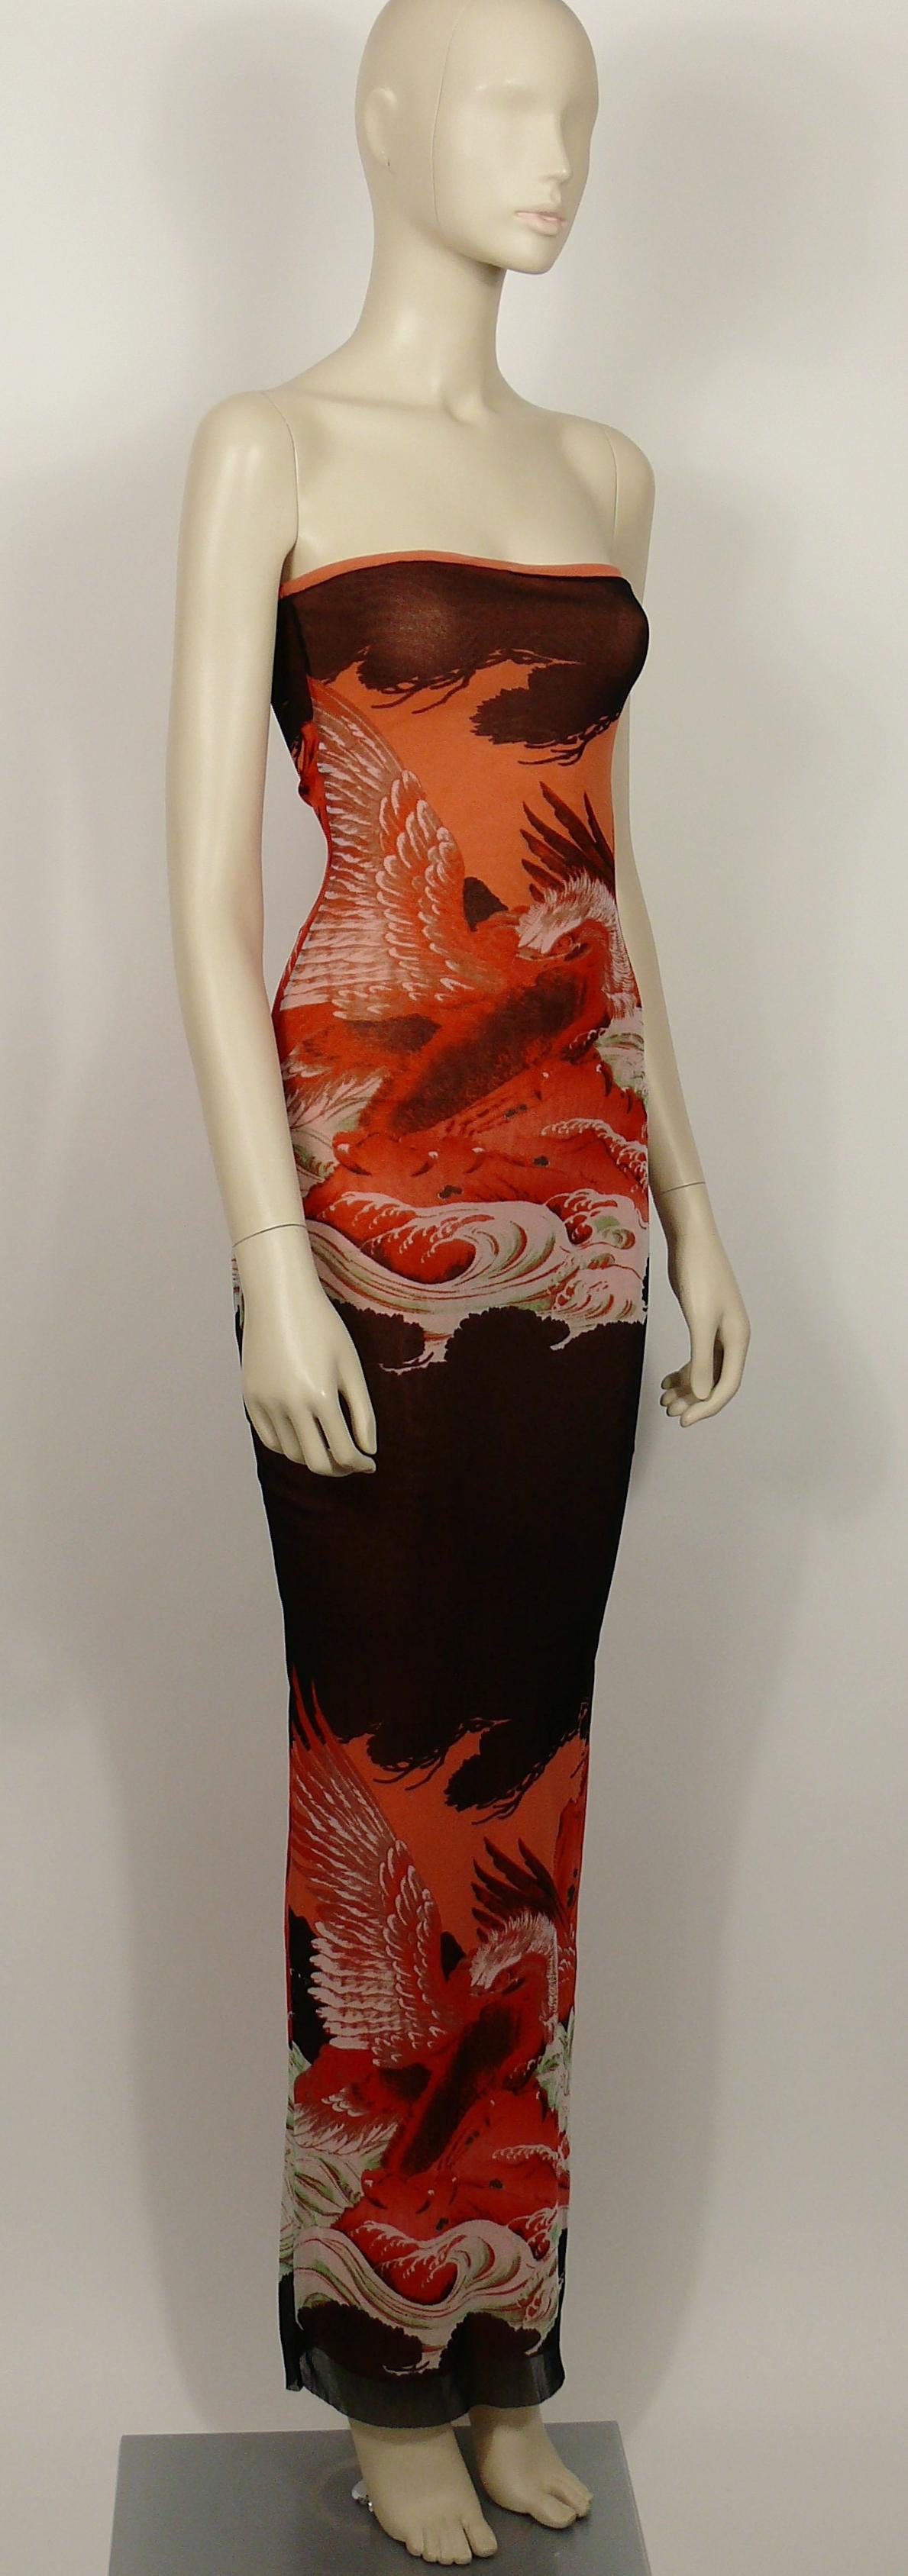 JEAN PAUL GAULTIER vintage eagle and wave Japanese print tattoo FUZZI mesh strapless tube dress.

Slips on.

Orange mesh lining.

Label reads JEAN PAUL GAULTIER SOLEIL.
Made in Italy.

Size label reads : S.
Please refer to measurements.

Composition